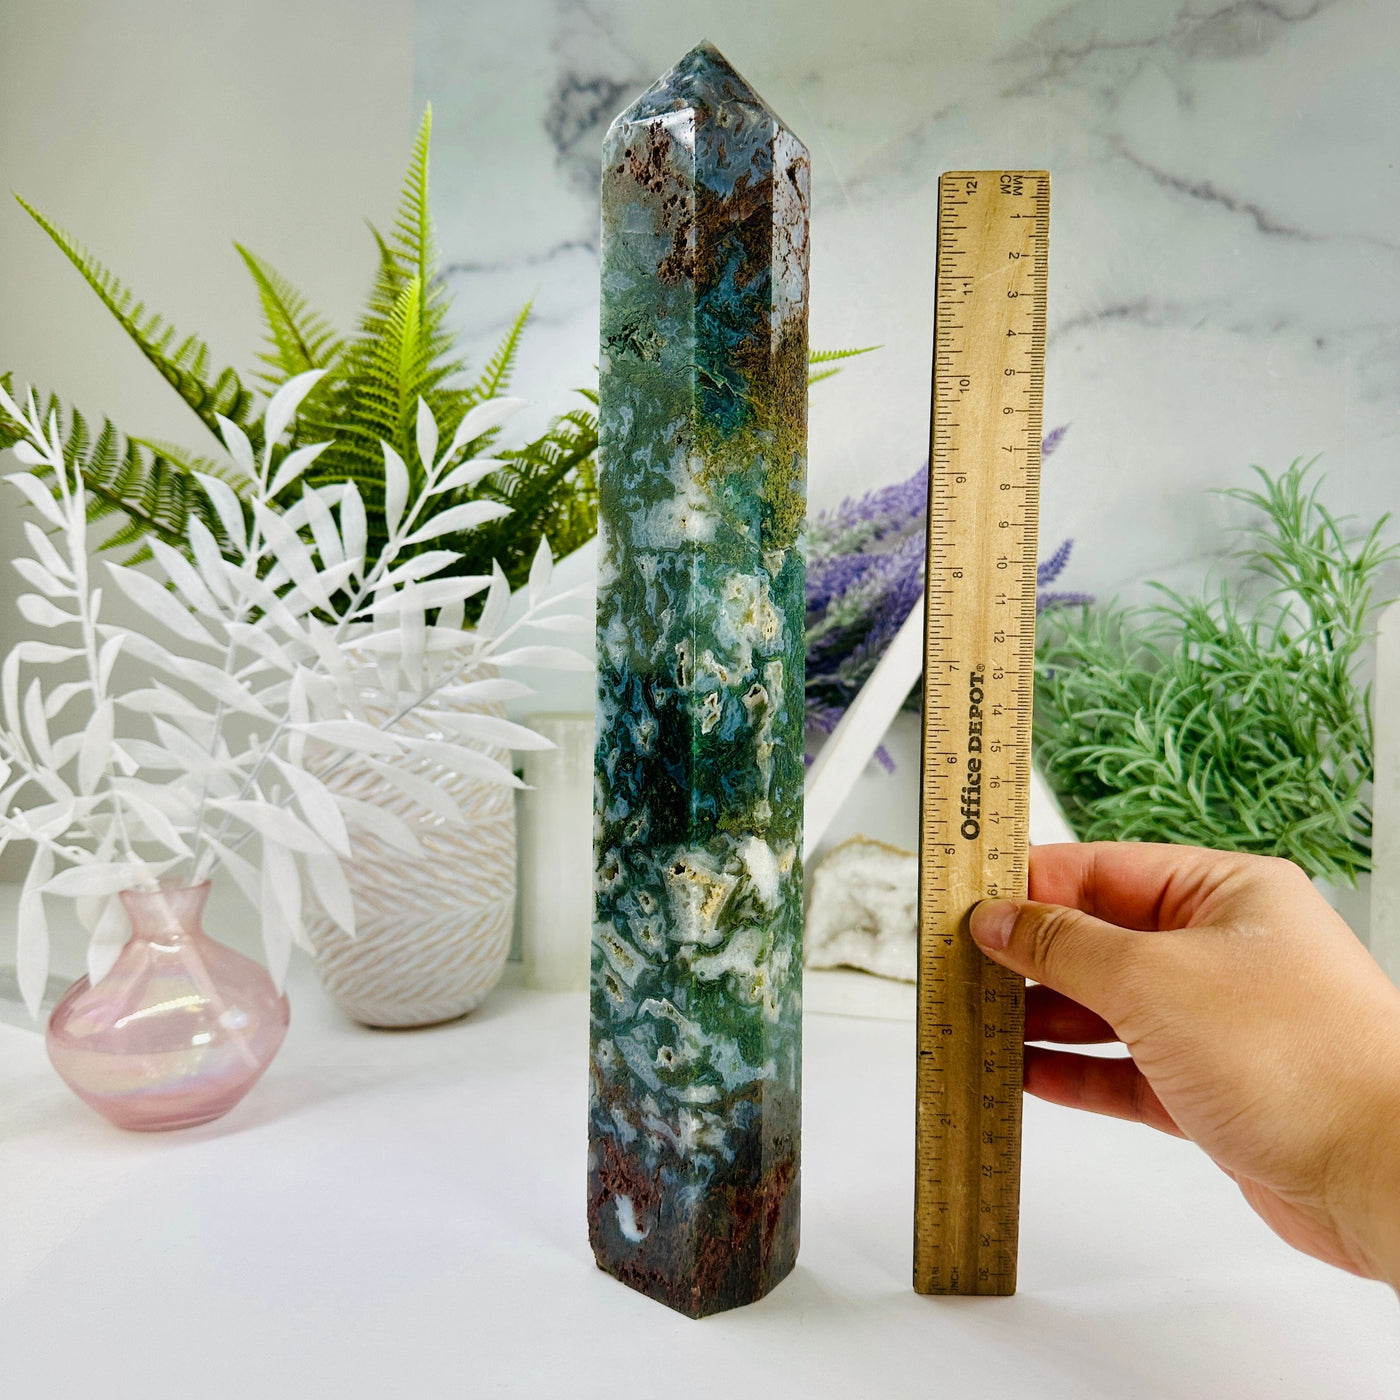 Moss Agate Generator - OOAK front view with ruler for size reference